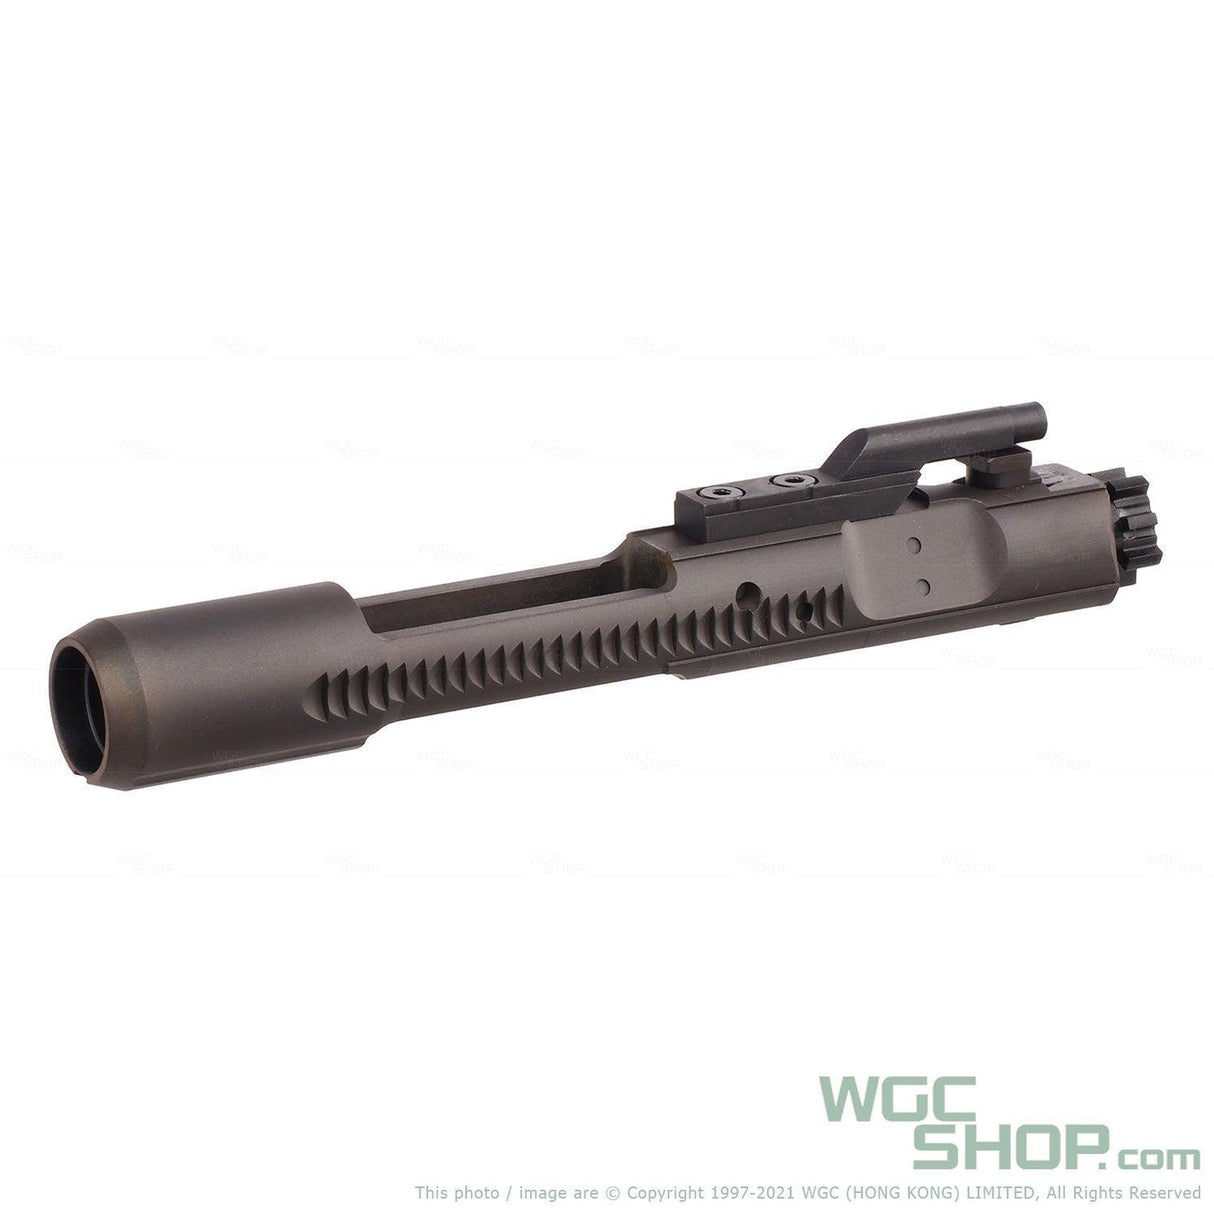 dnA AR Steel Bolt Carrier Assembly for Airsoft - WGC Shop